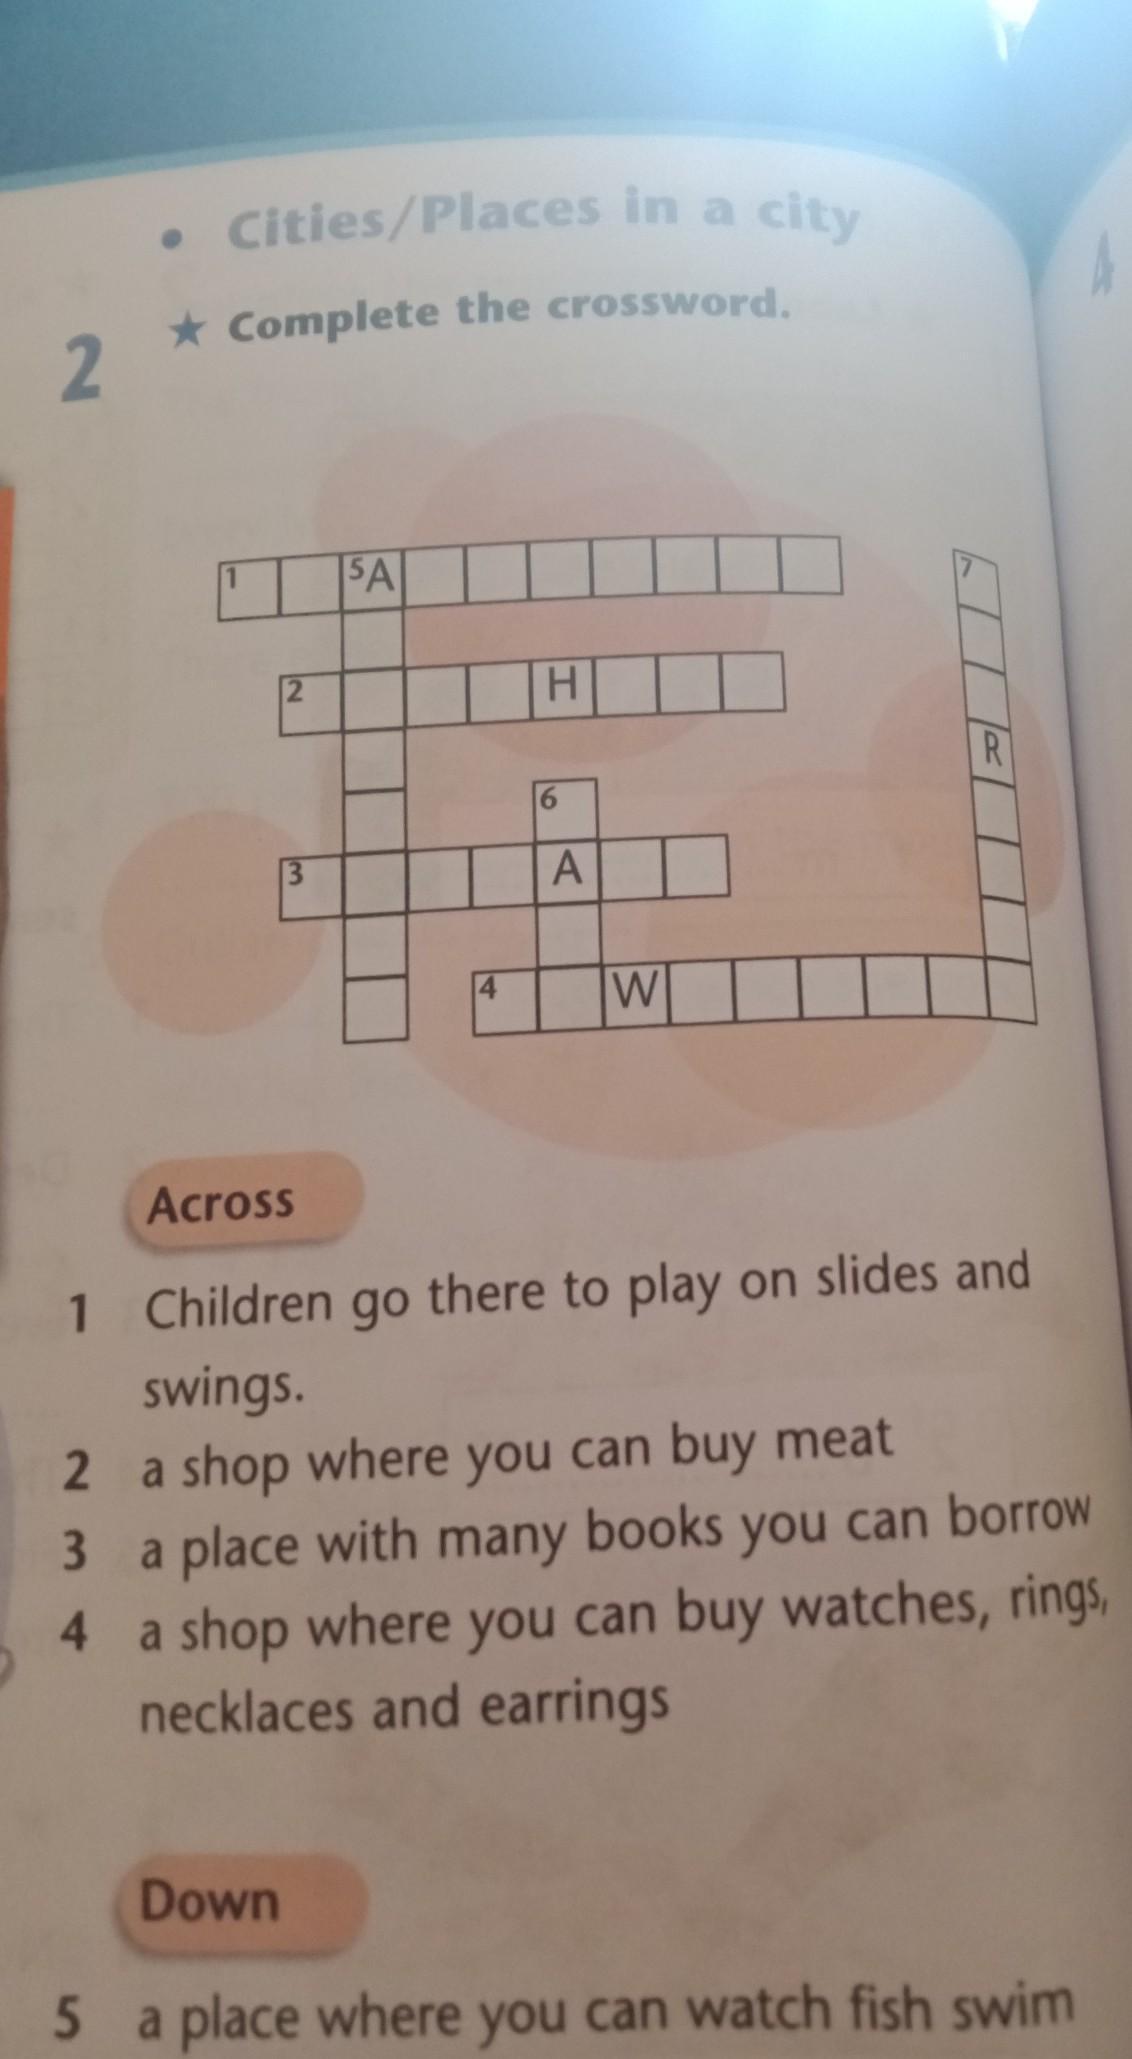 Complete the crossword down